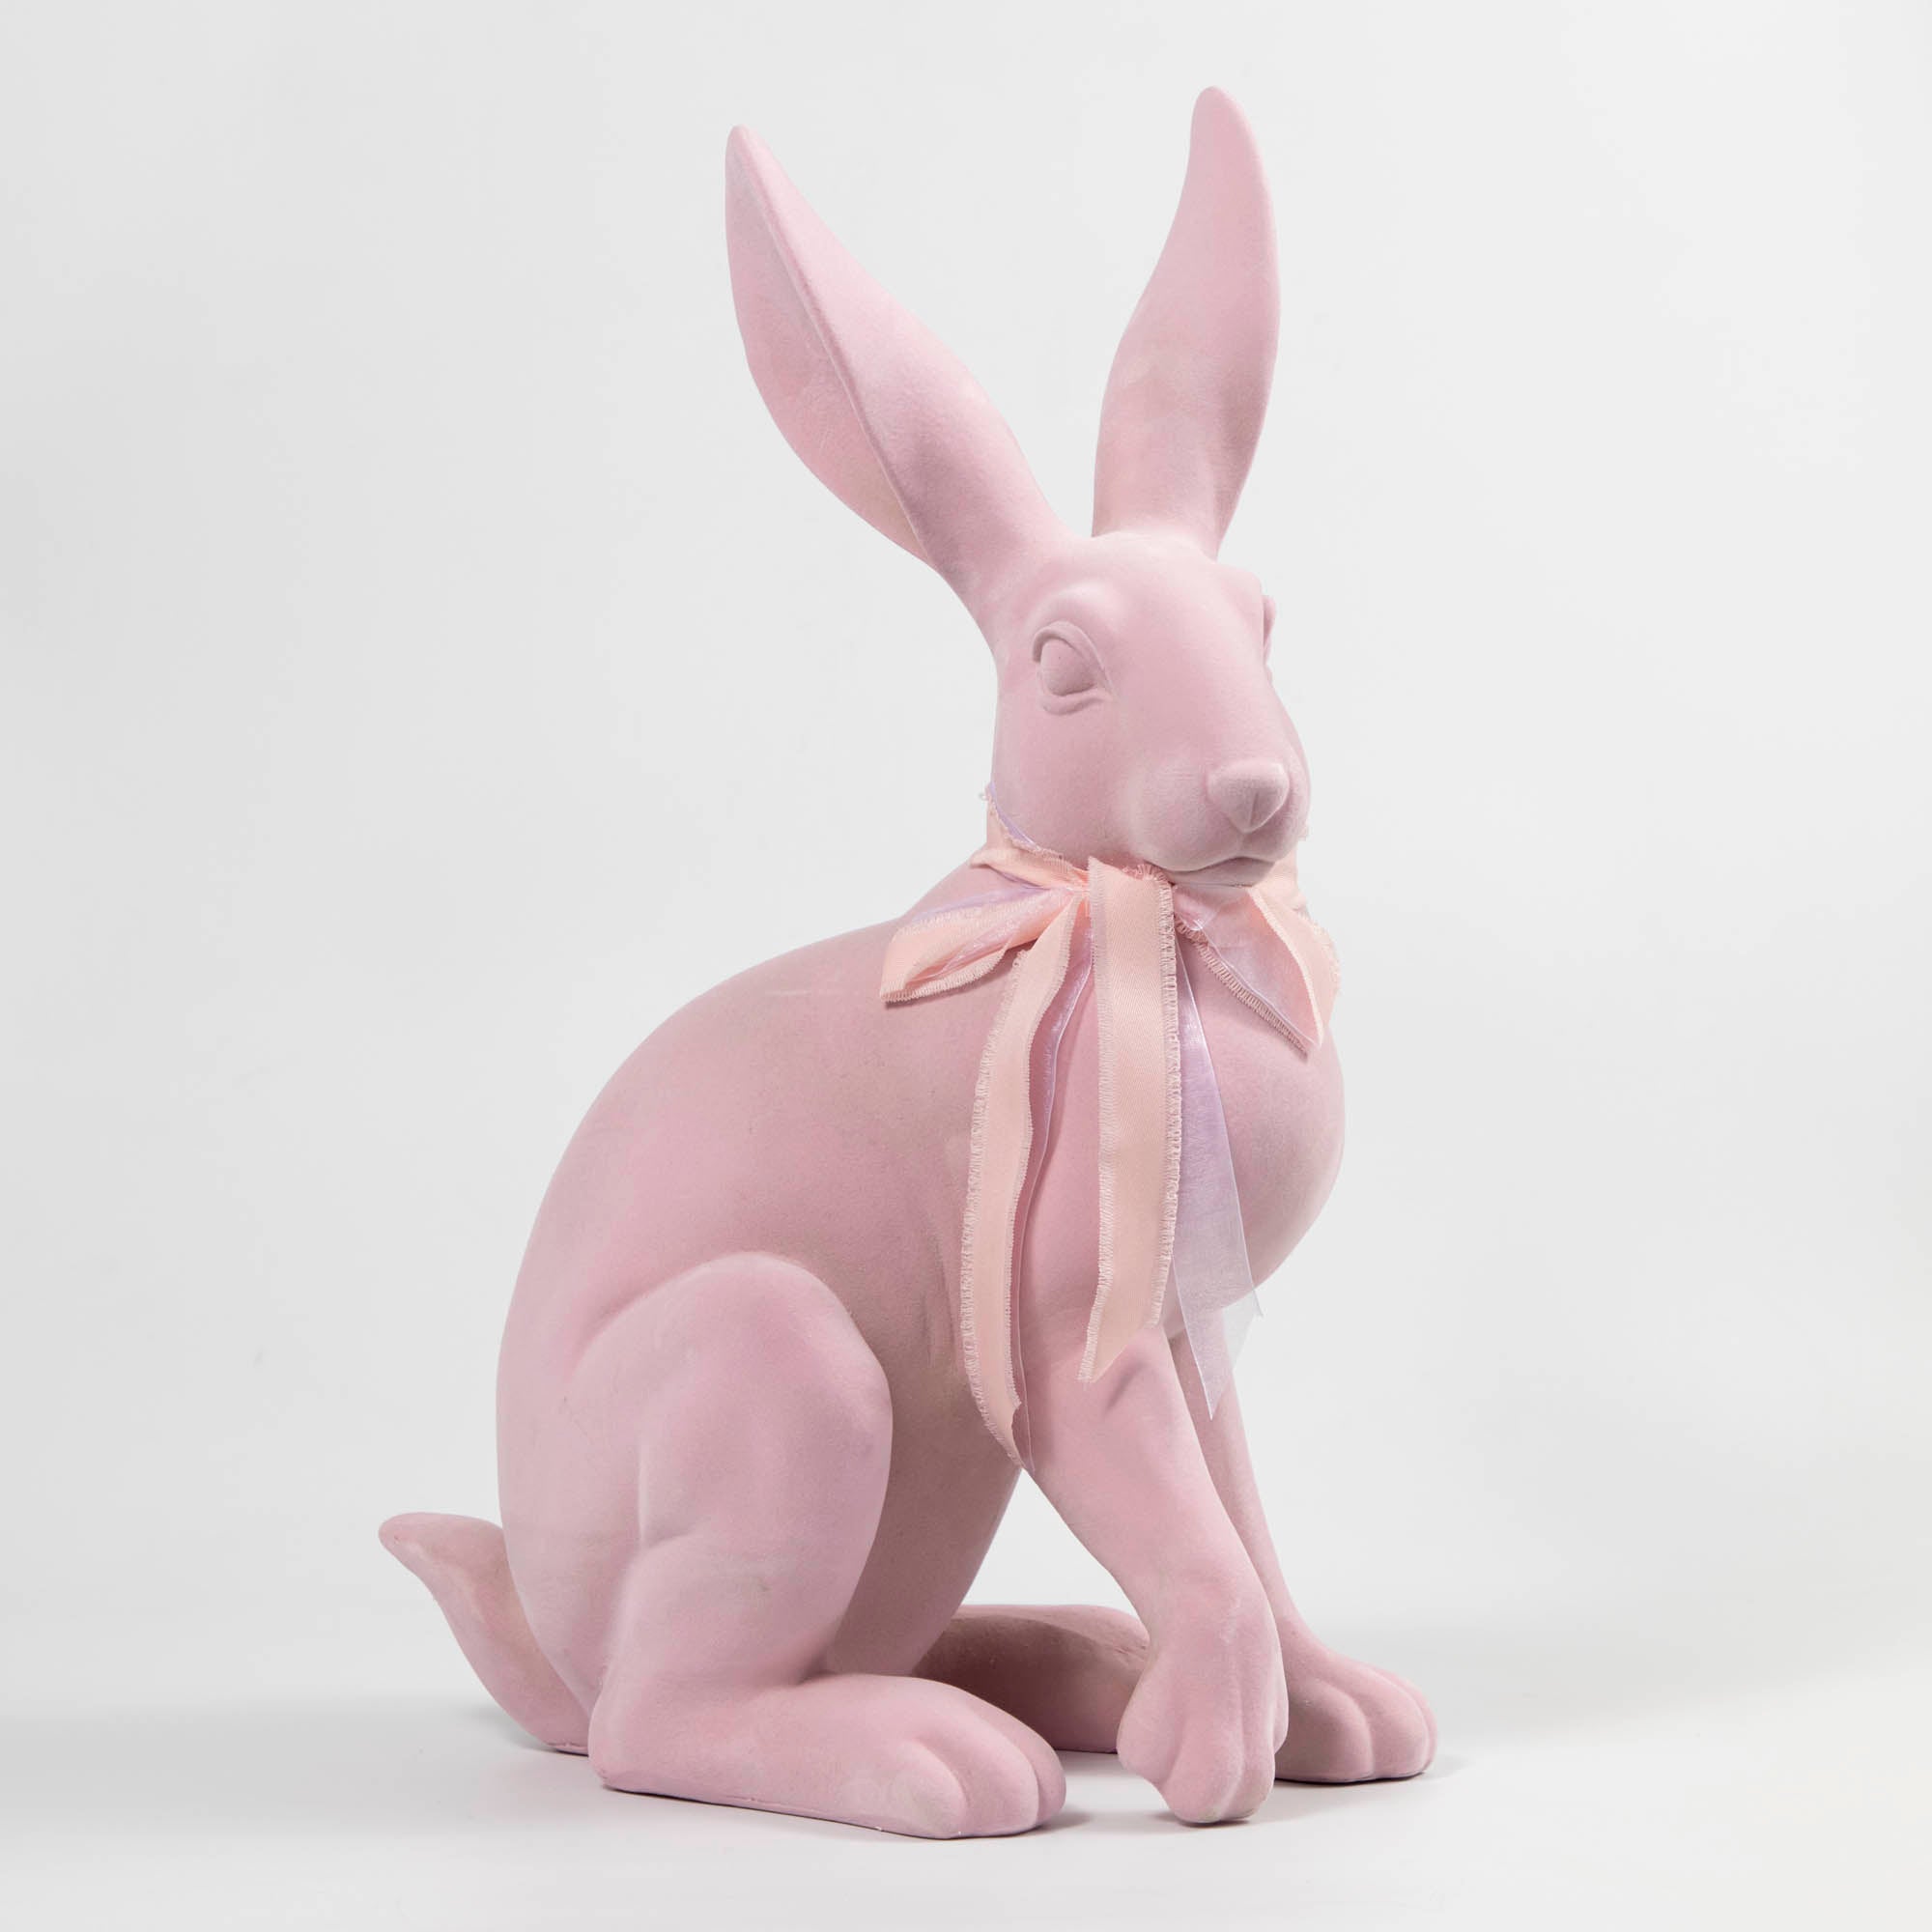 A sculpture of a White &amp; Pink Flocked Bunny with a pink bow, perfect for Easter decorations, made by Glitterville.